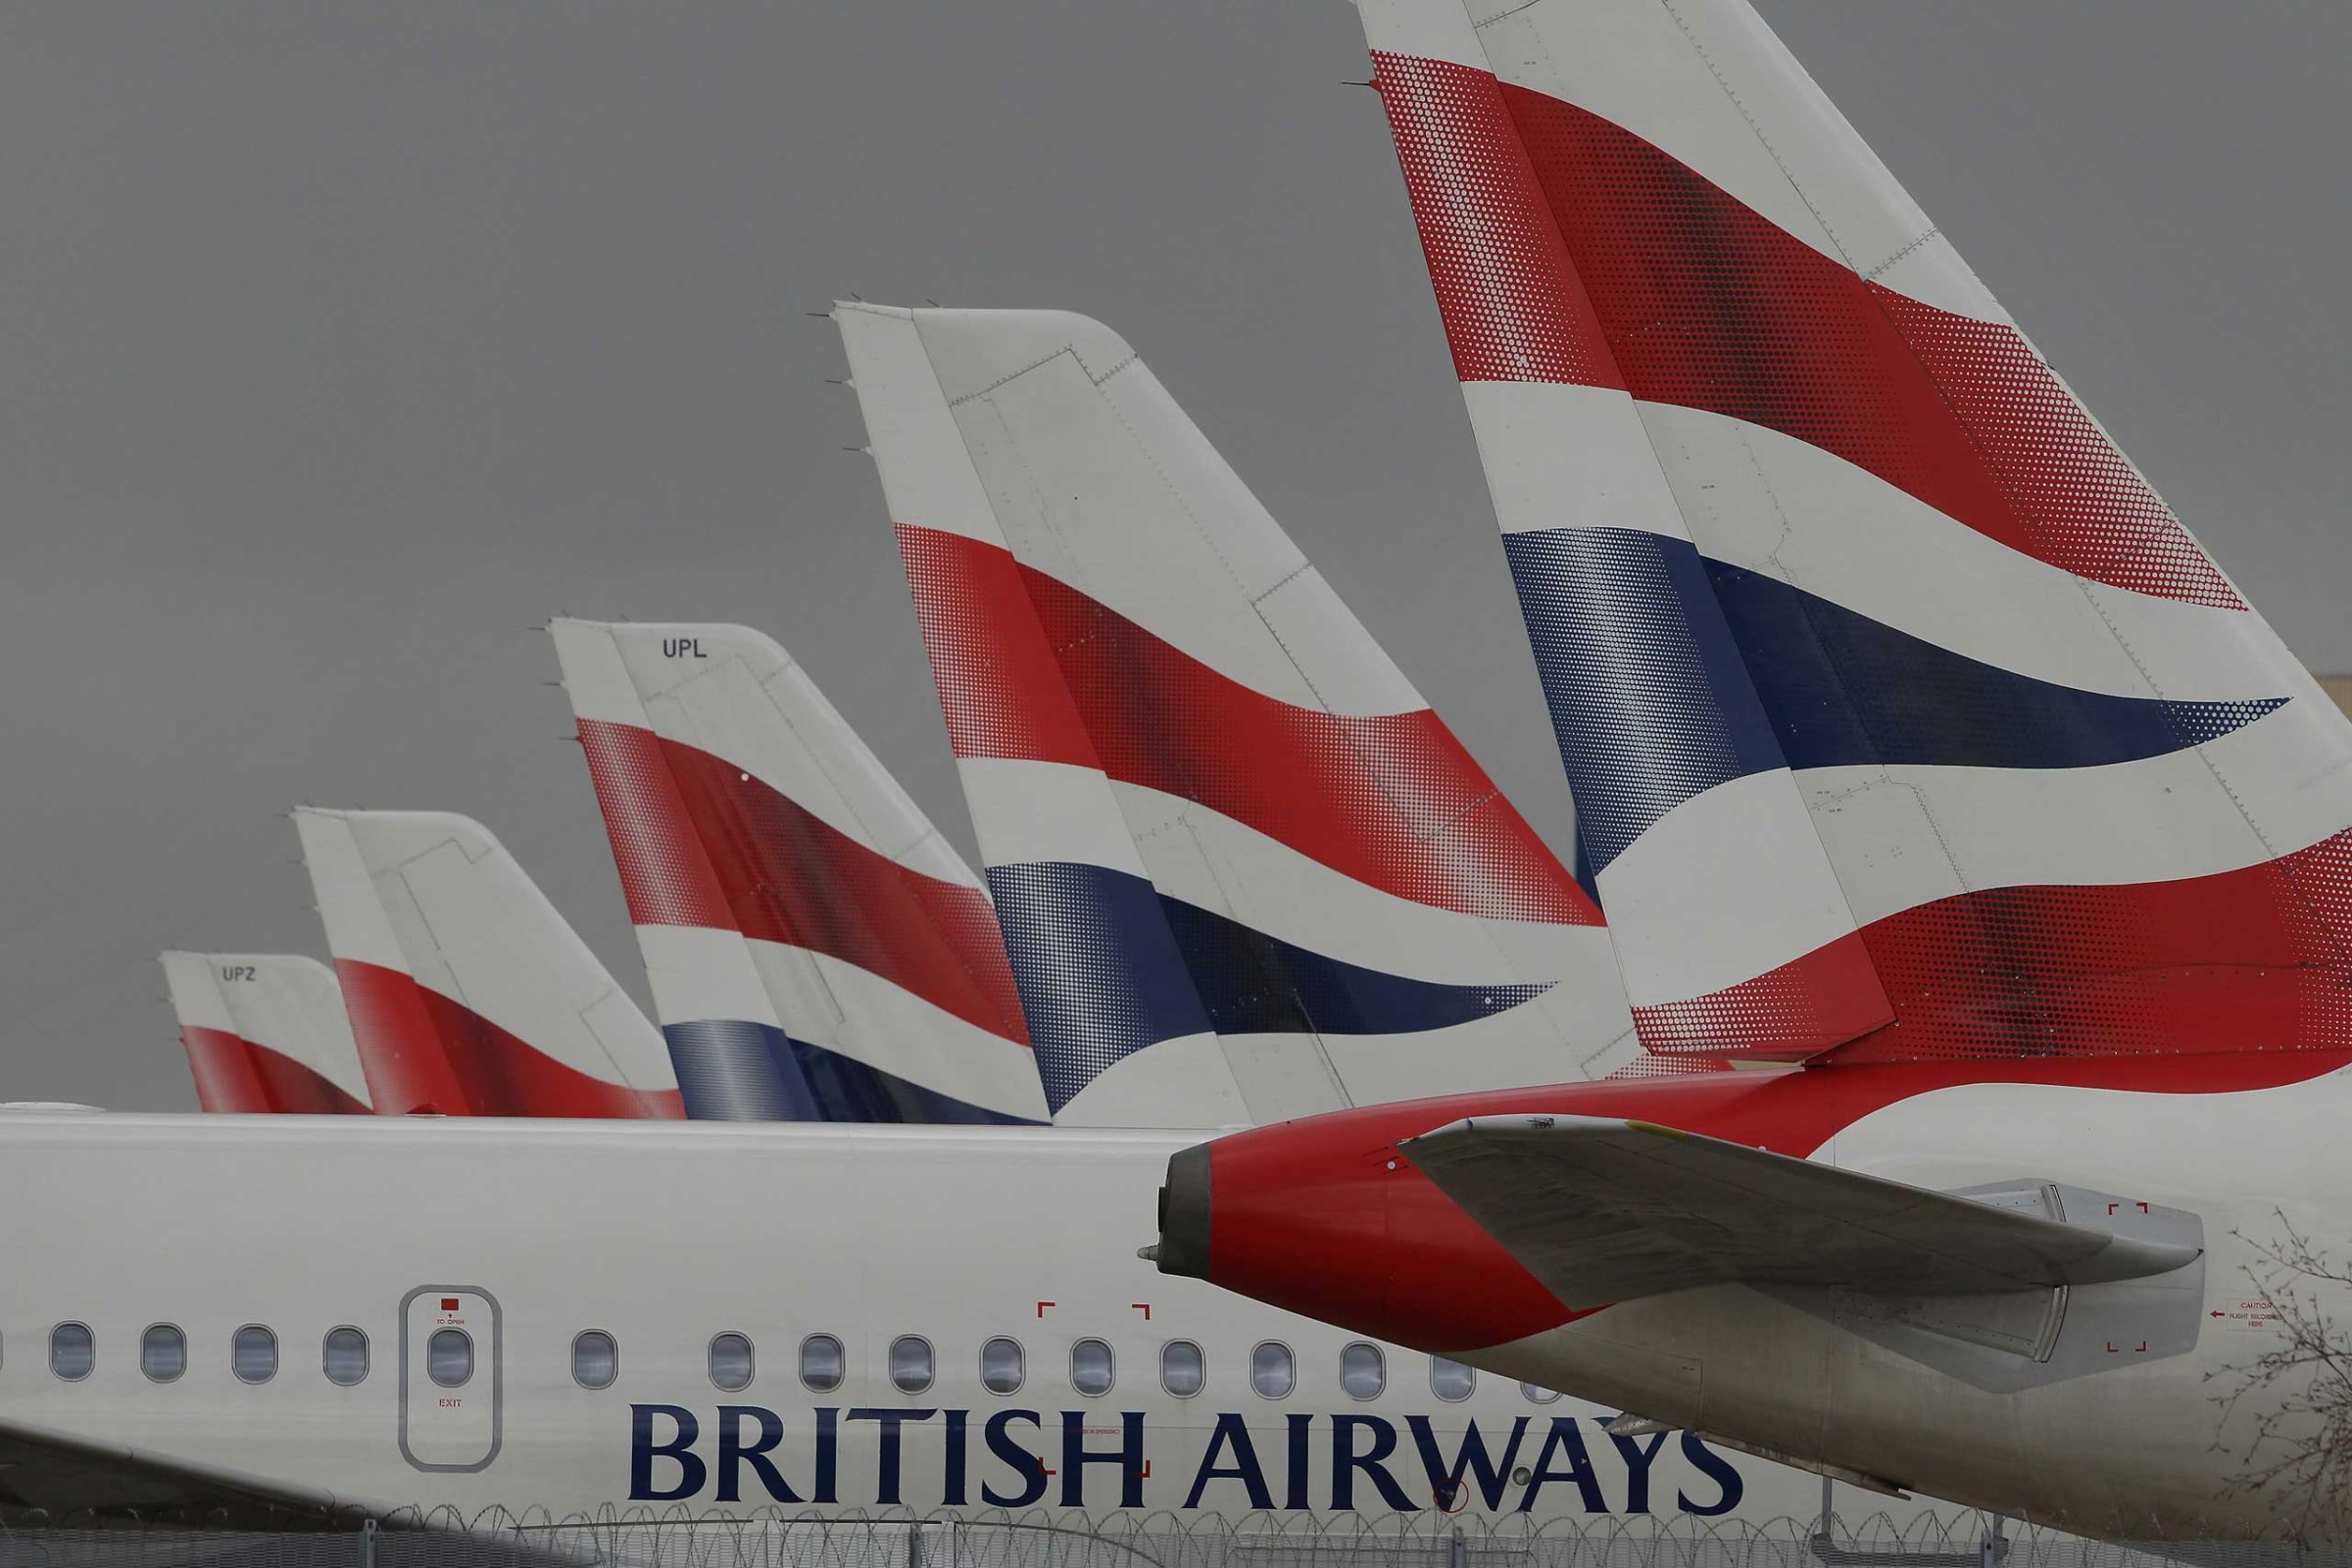 British Airways aircraft are parked on an apron at Heathrow airport during the first day of a strike by cabin crew on March 27, 2010 in London.